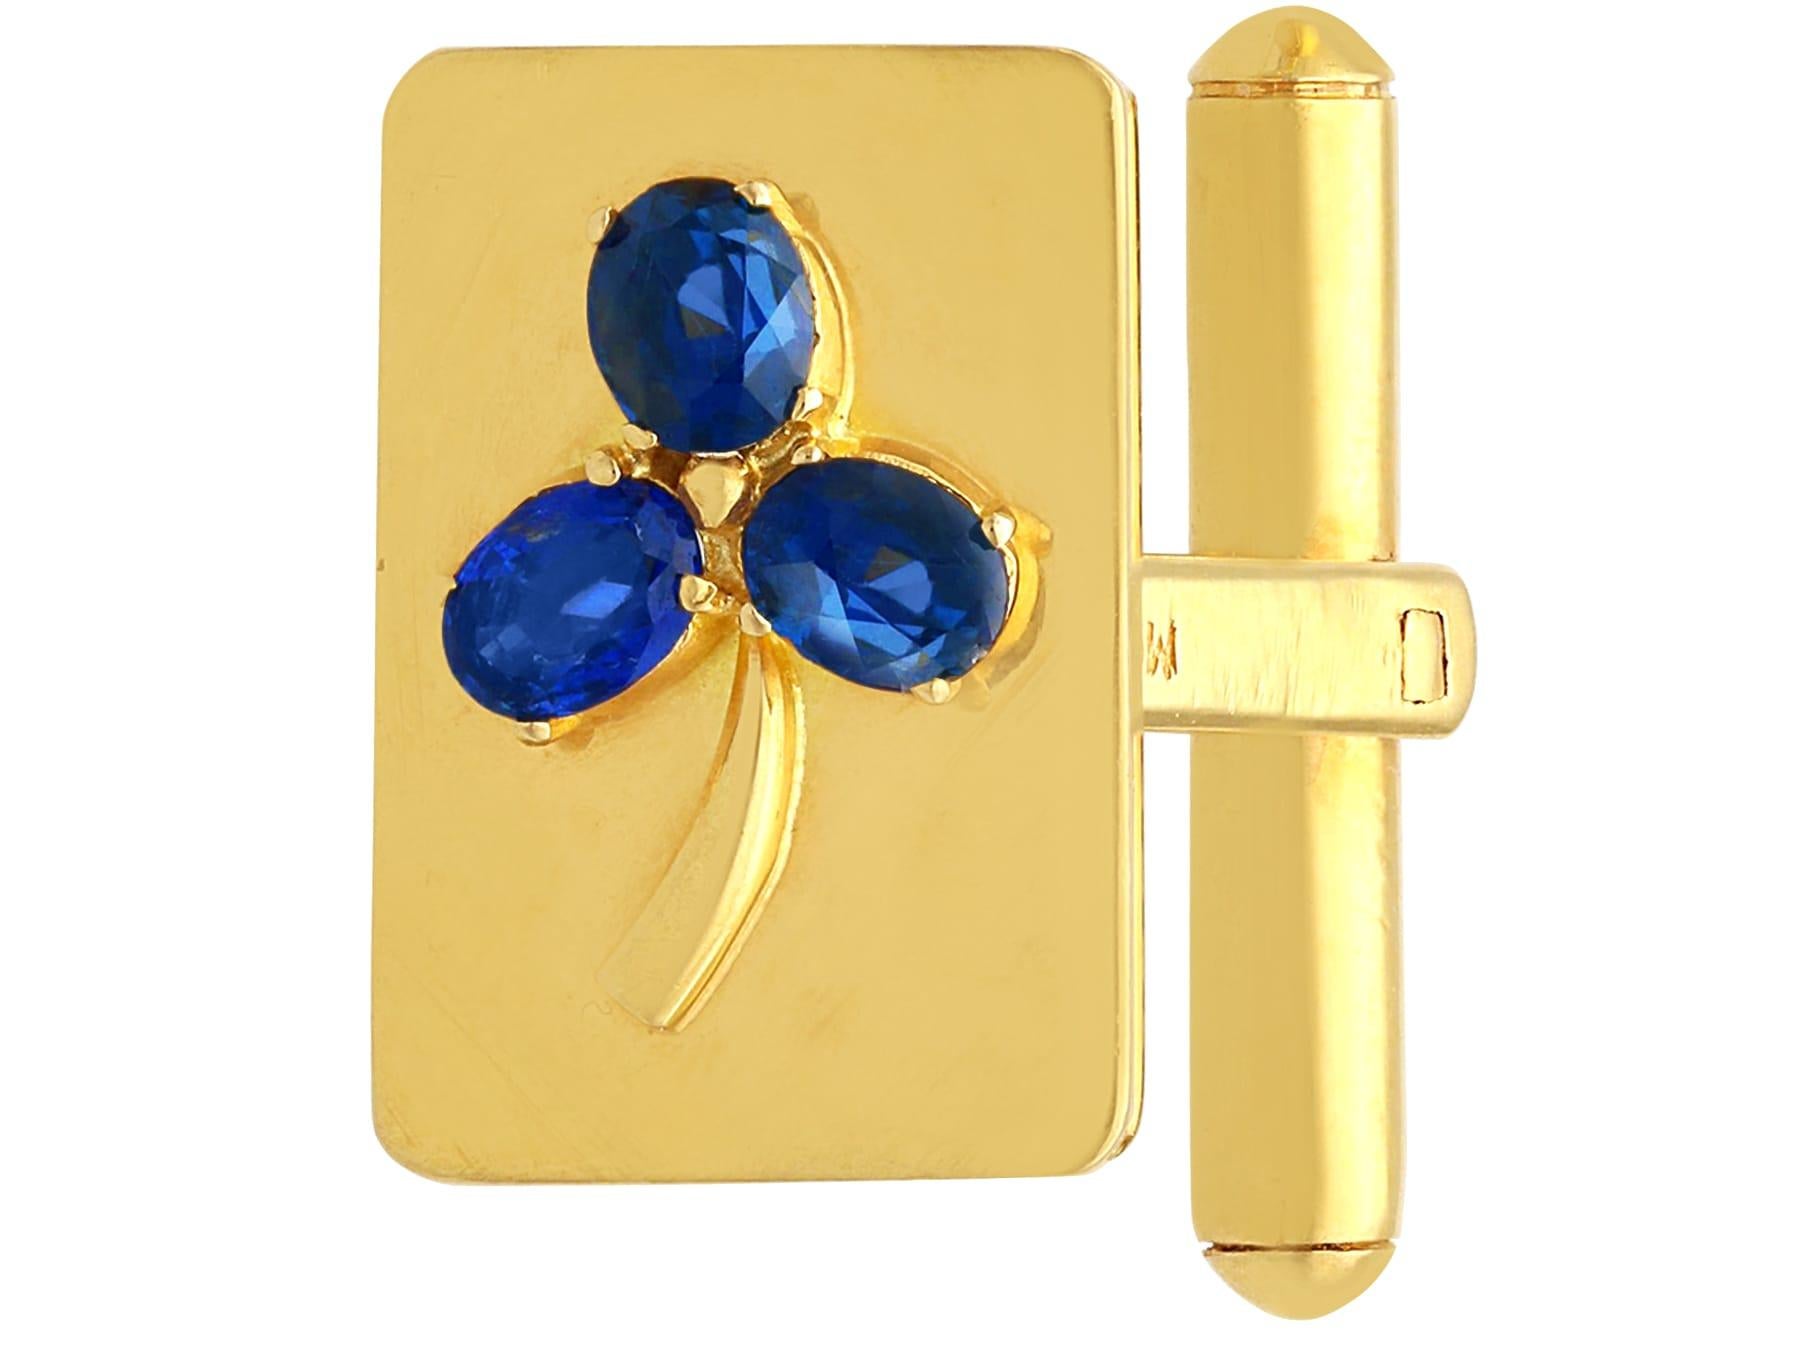 A stunning, fine and impressive pair of vintage 1950's 1.68 carat Burmese sapphire and 18 karat yellow gold cufflinks; part of our diverse sapphire jewellery and estate jewelry collections

These stunningvintage cufflinks have been crafted in 18k